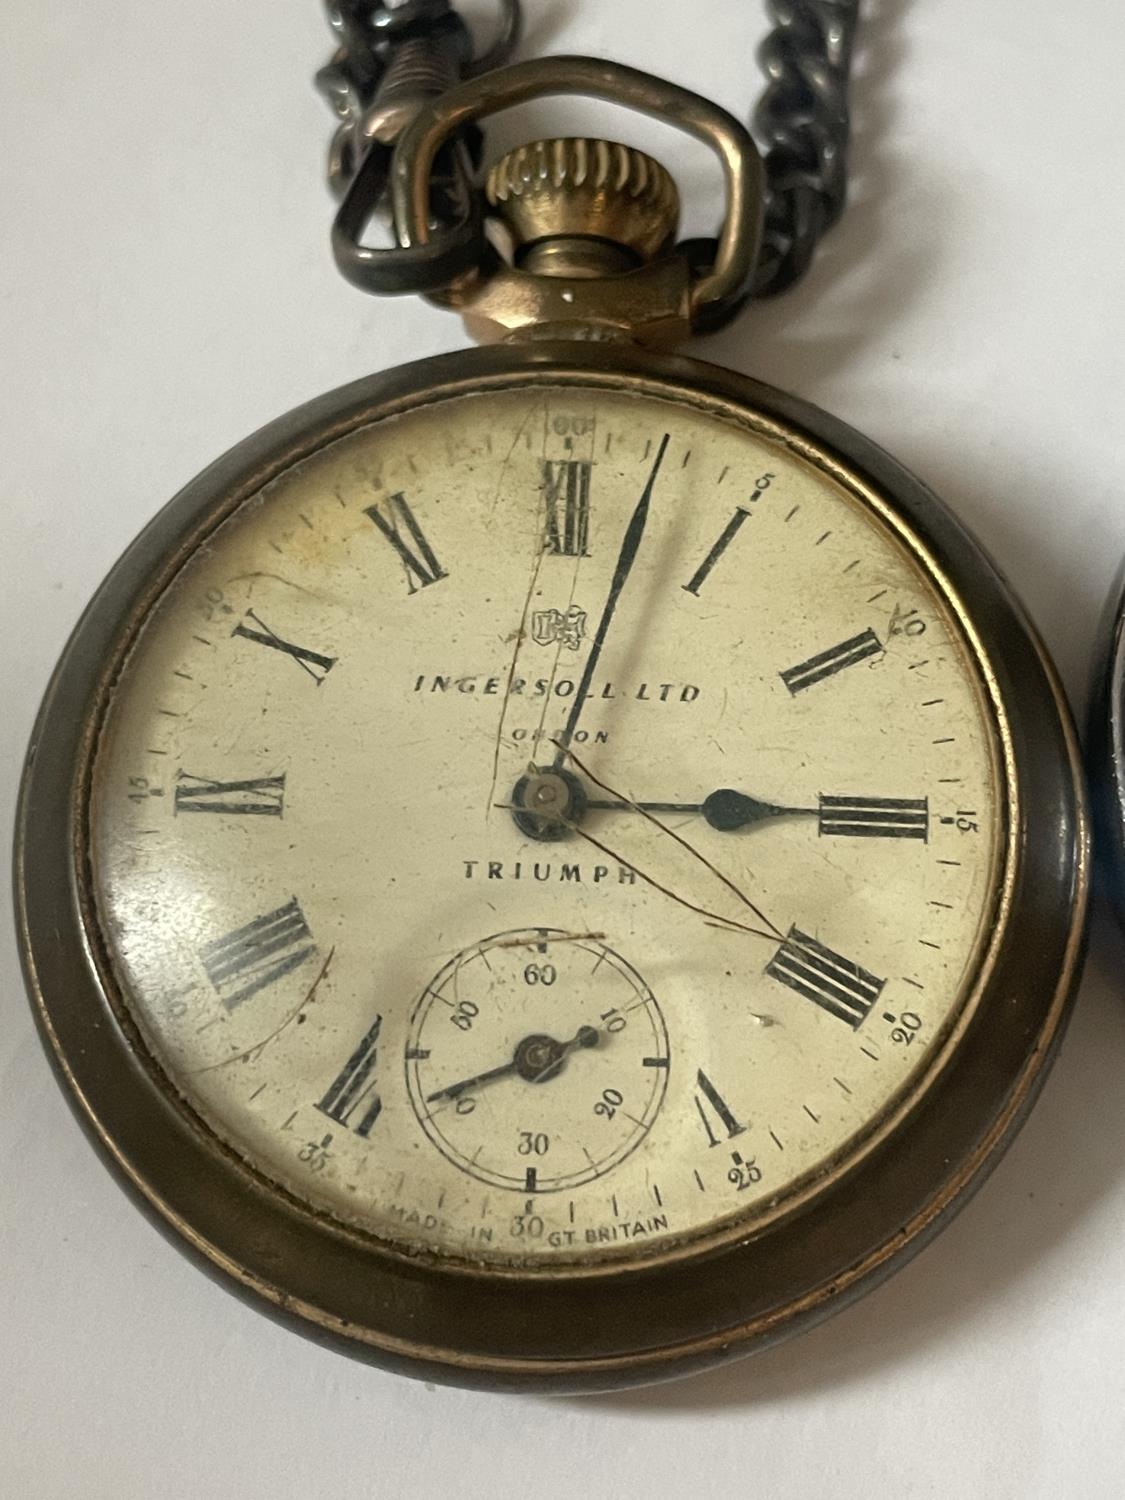 TWO INGERSOLL POCKET WATCHES - Image 3 of 4